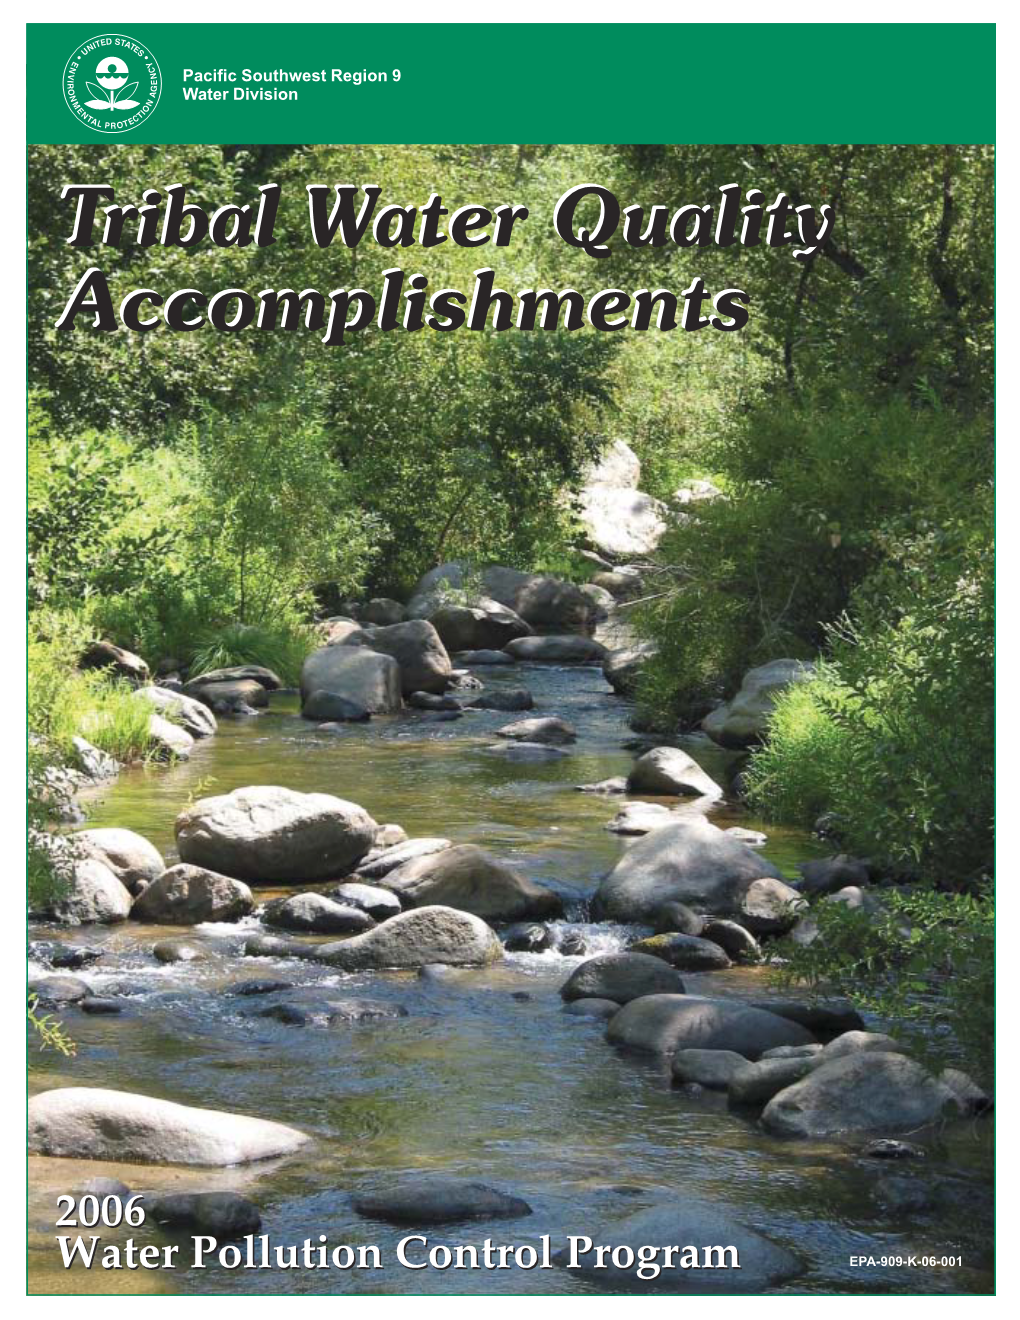 Tribal Water Quality Accomplishments in EPA's Pacfific Southwest